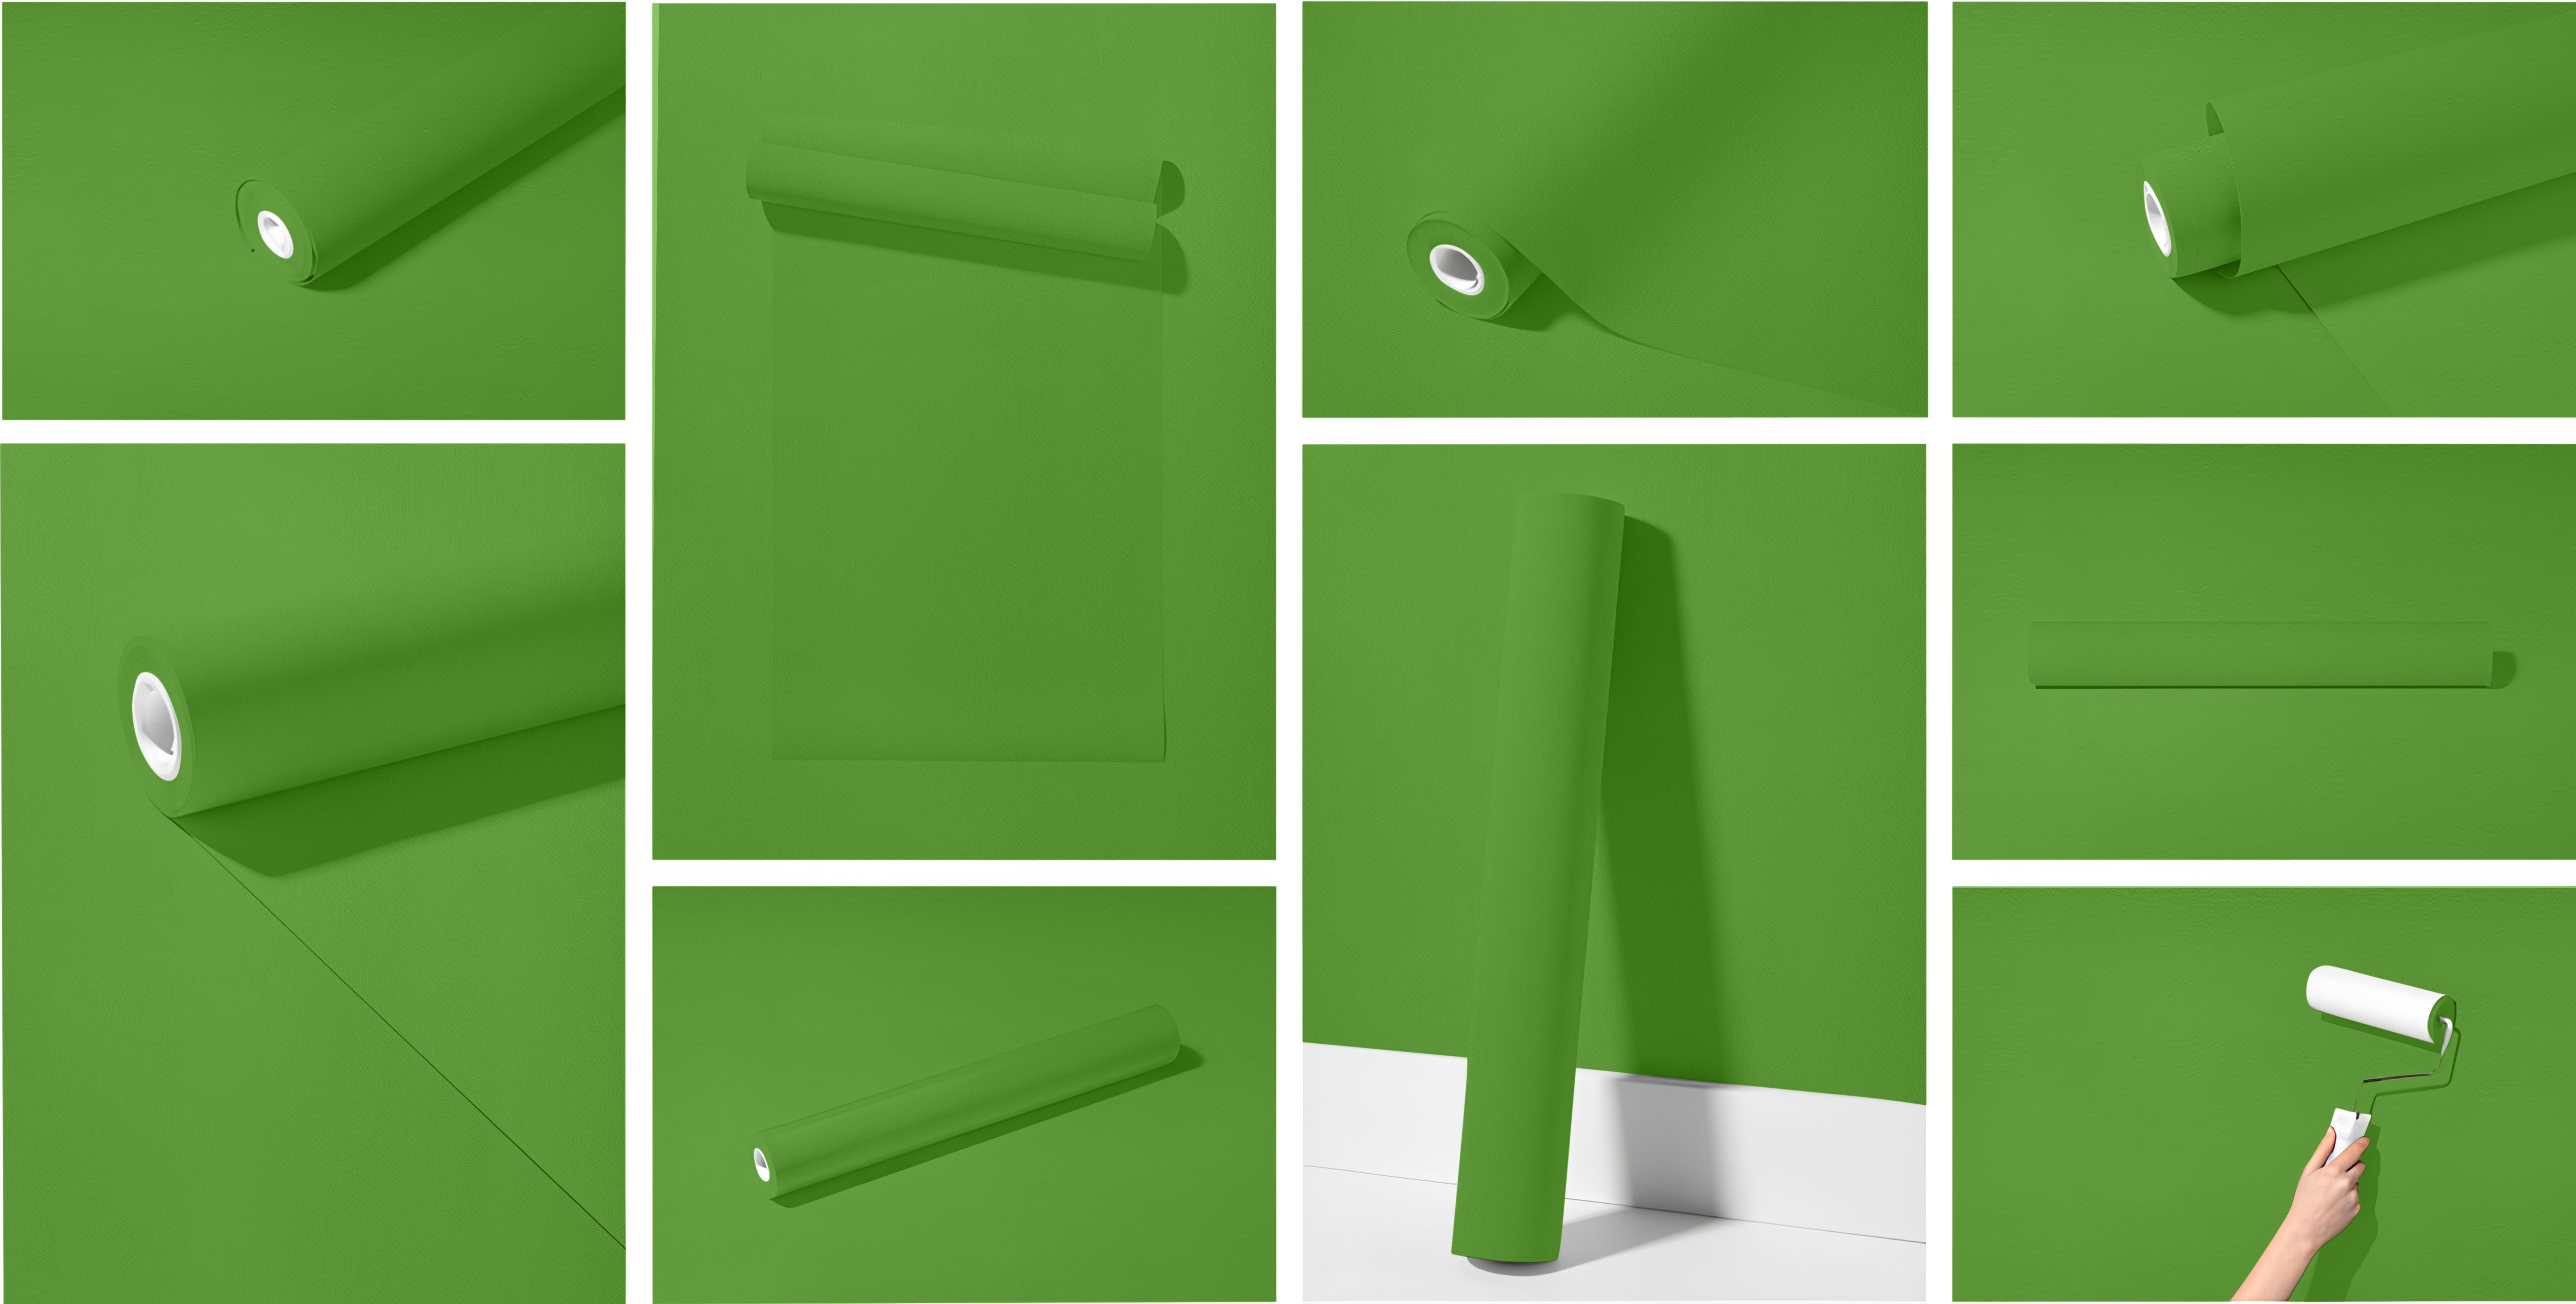 Peel & Stick Removable Re-usable Paint - Color RAL 6018 Yellow Green - offRAL™ - RALRAW LLC, USA